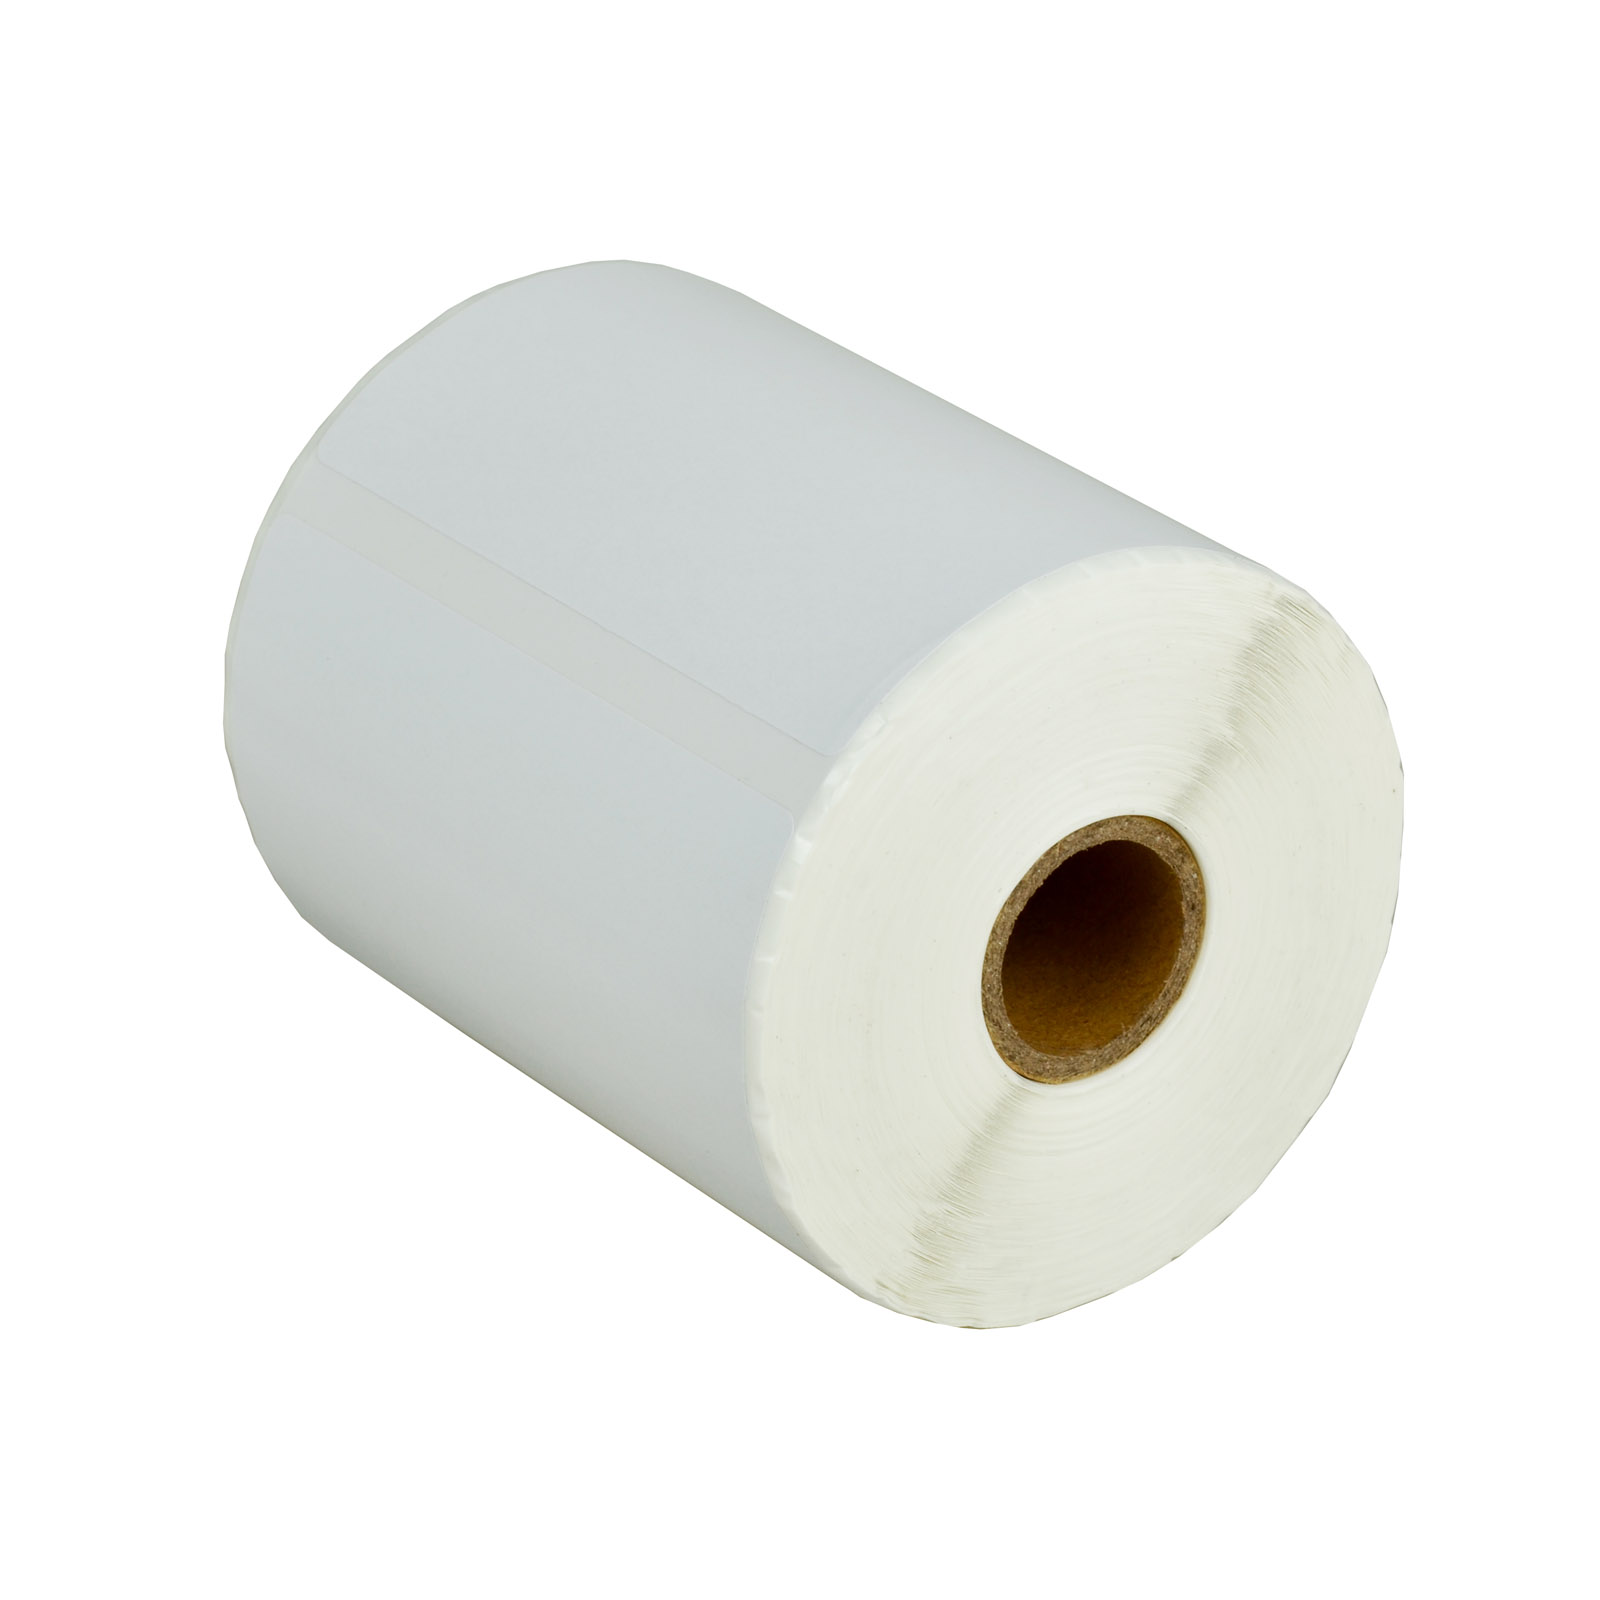 GREENCYCLE 20 Roll (270 labels per roll) White Die Cut Paper Label Compatible for Brother RDS02U1 4"x6" TD-4000 TD-4100N Printer